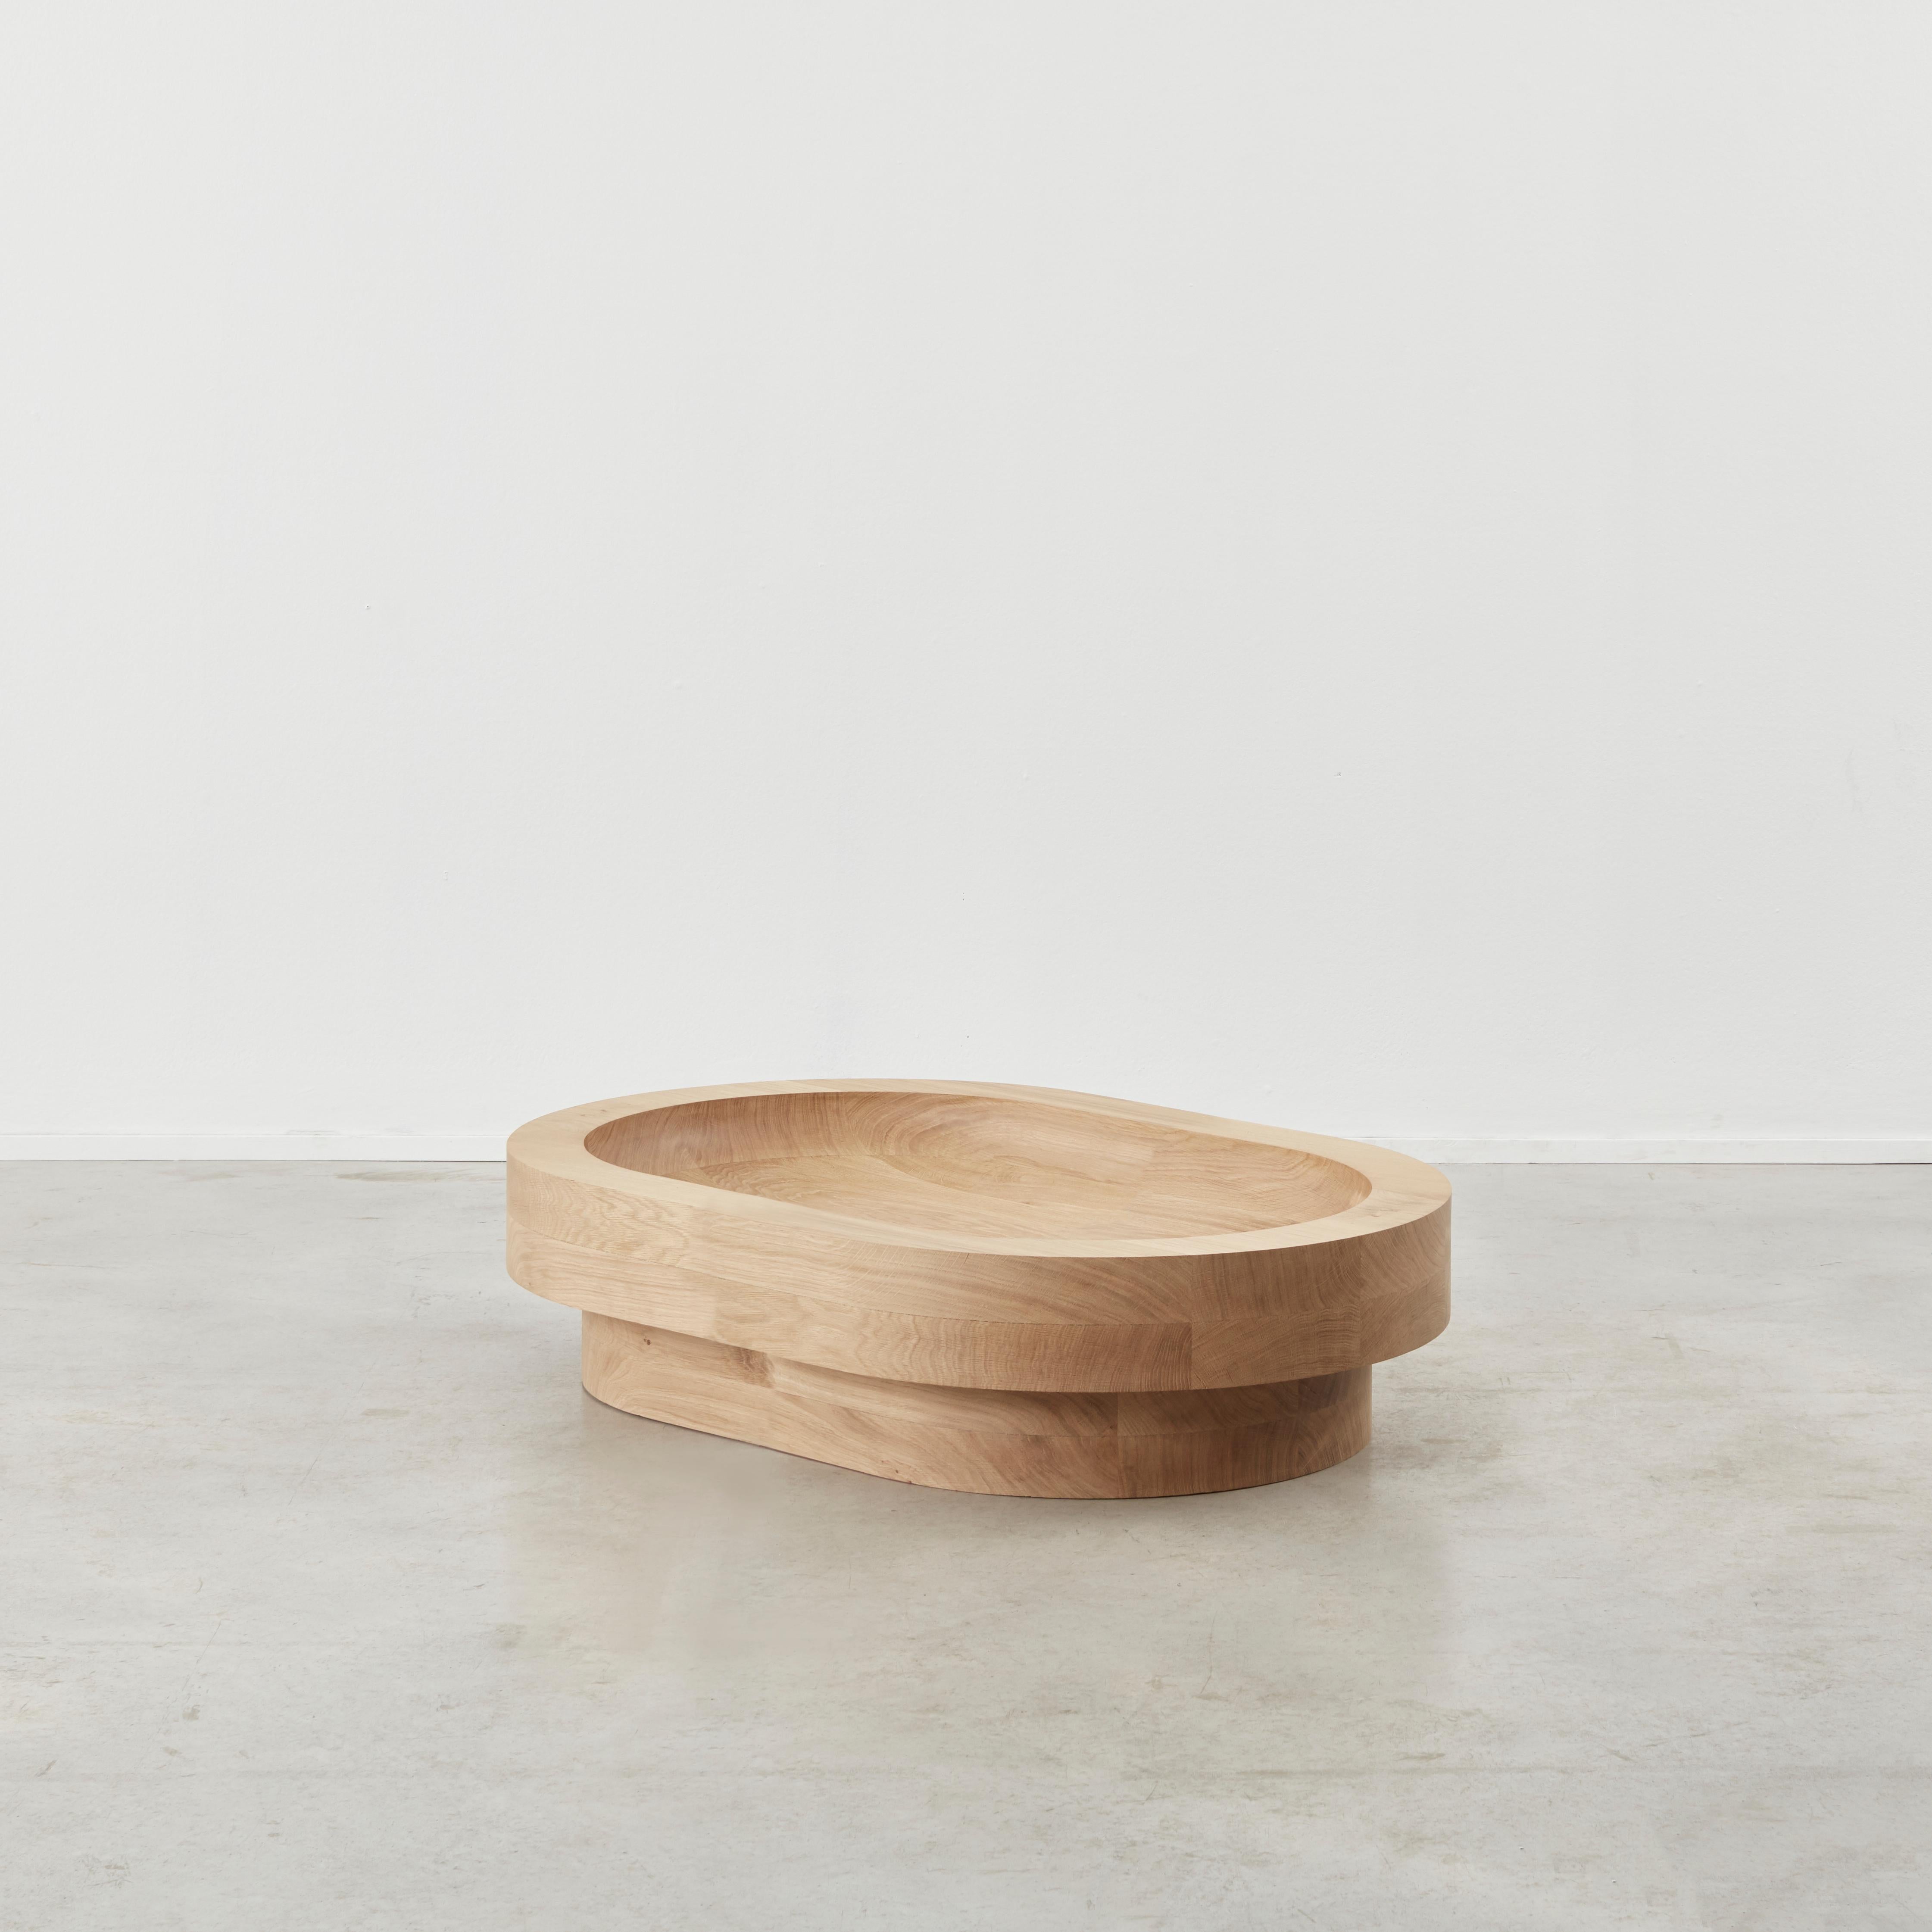 Edition of 8 + 1AP

‘Low Table Two’ is a new work by architect, designer and maker Benni Allan exploring different ways of sitting. Part of his first full collection of furniture, Low Collection, exclusive to Béton Brut. And was inspired by recent